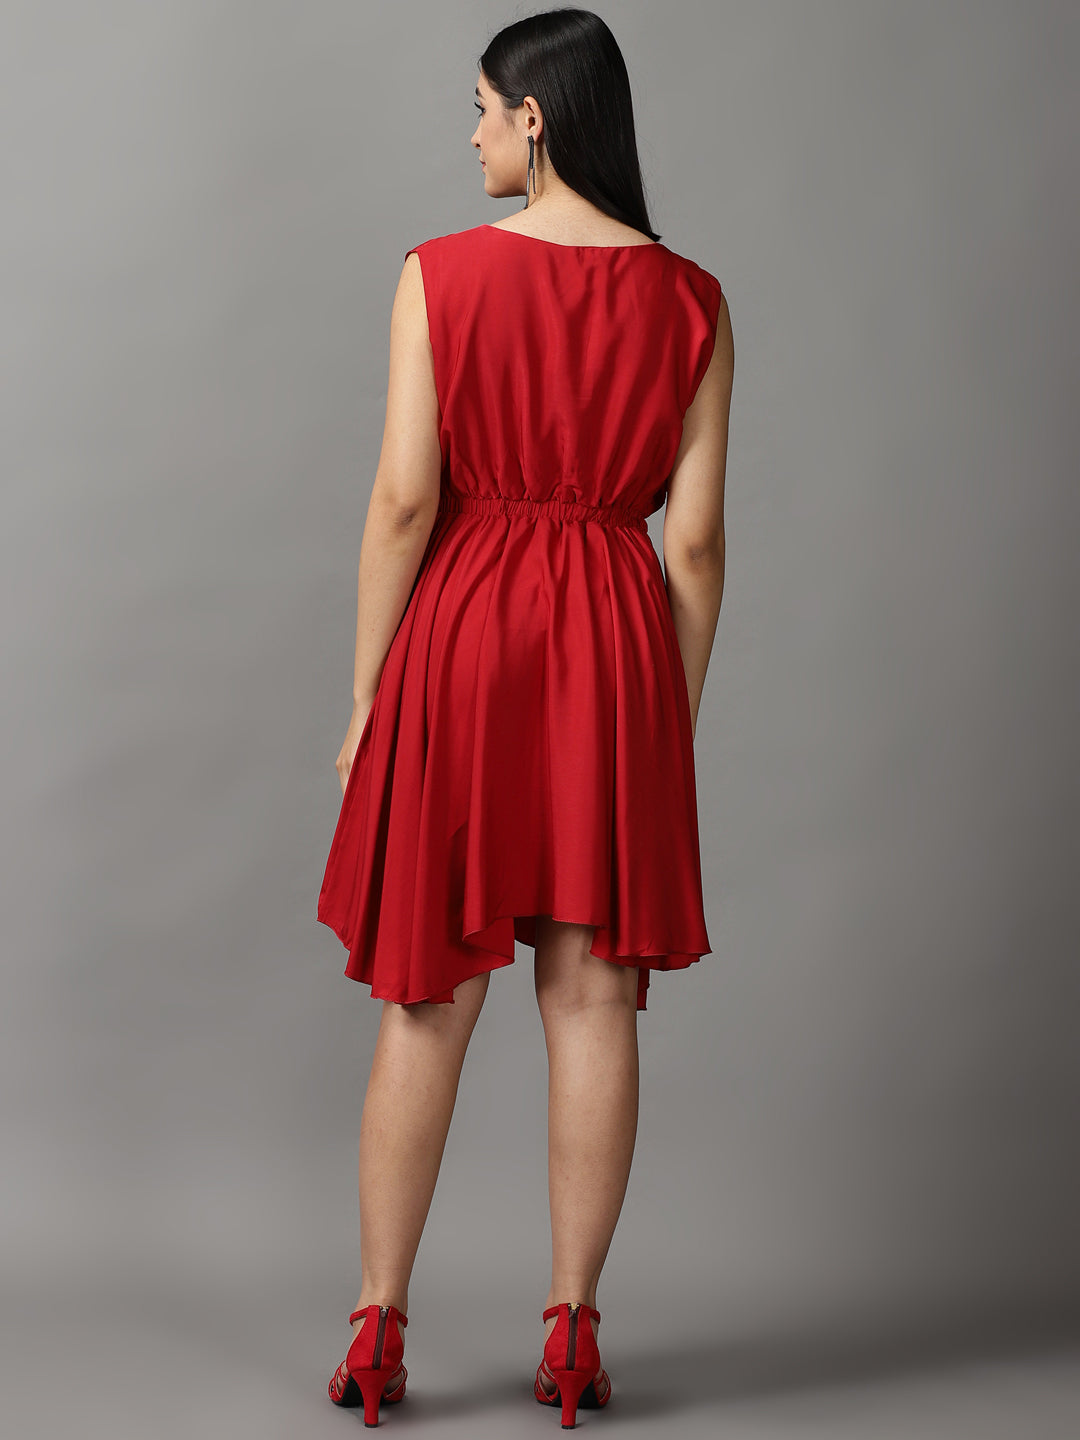 Women's Red Solid Fit and Flare Dress